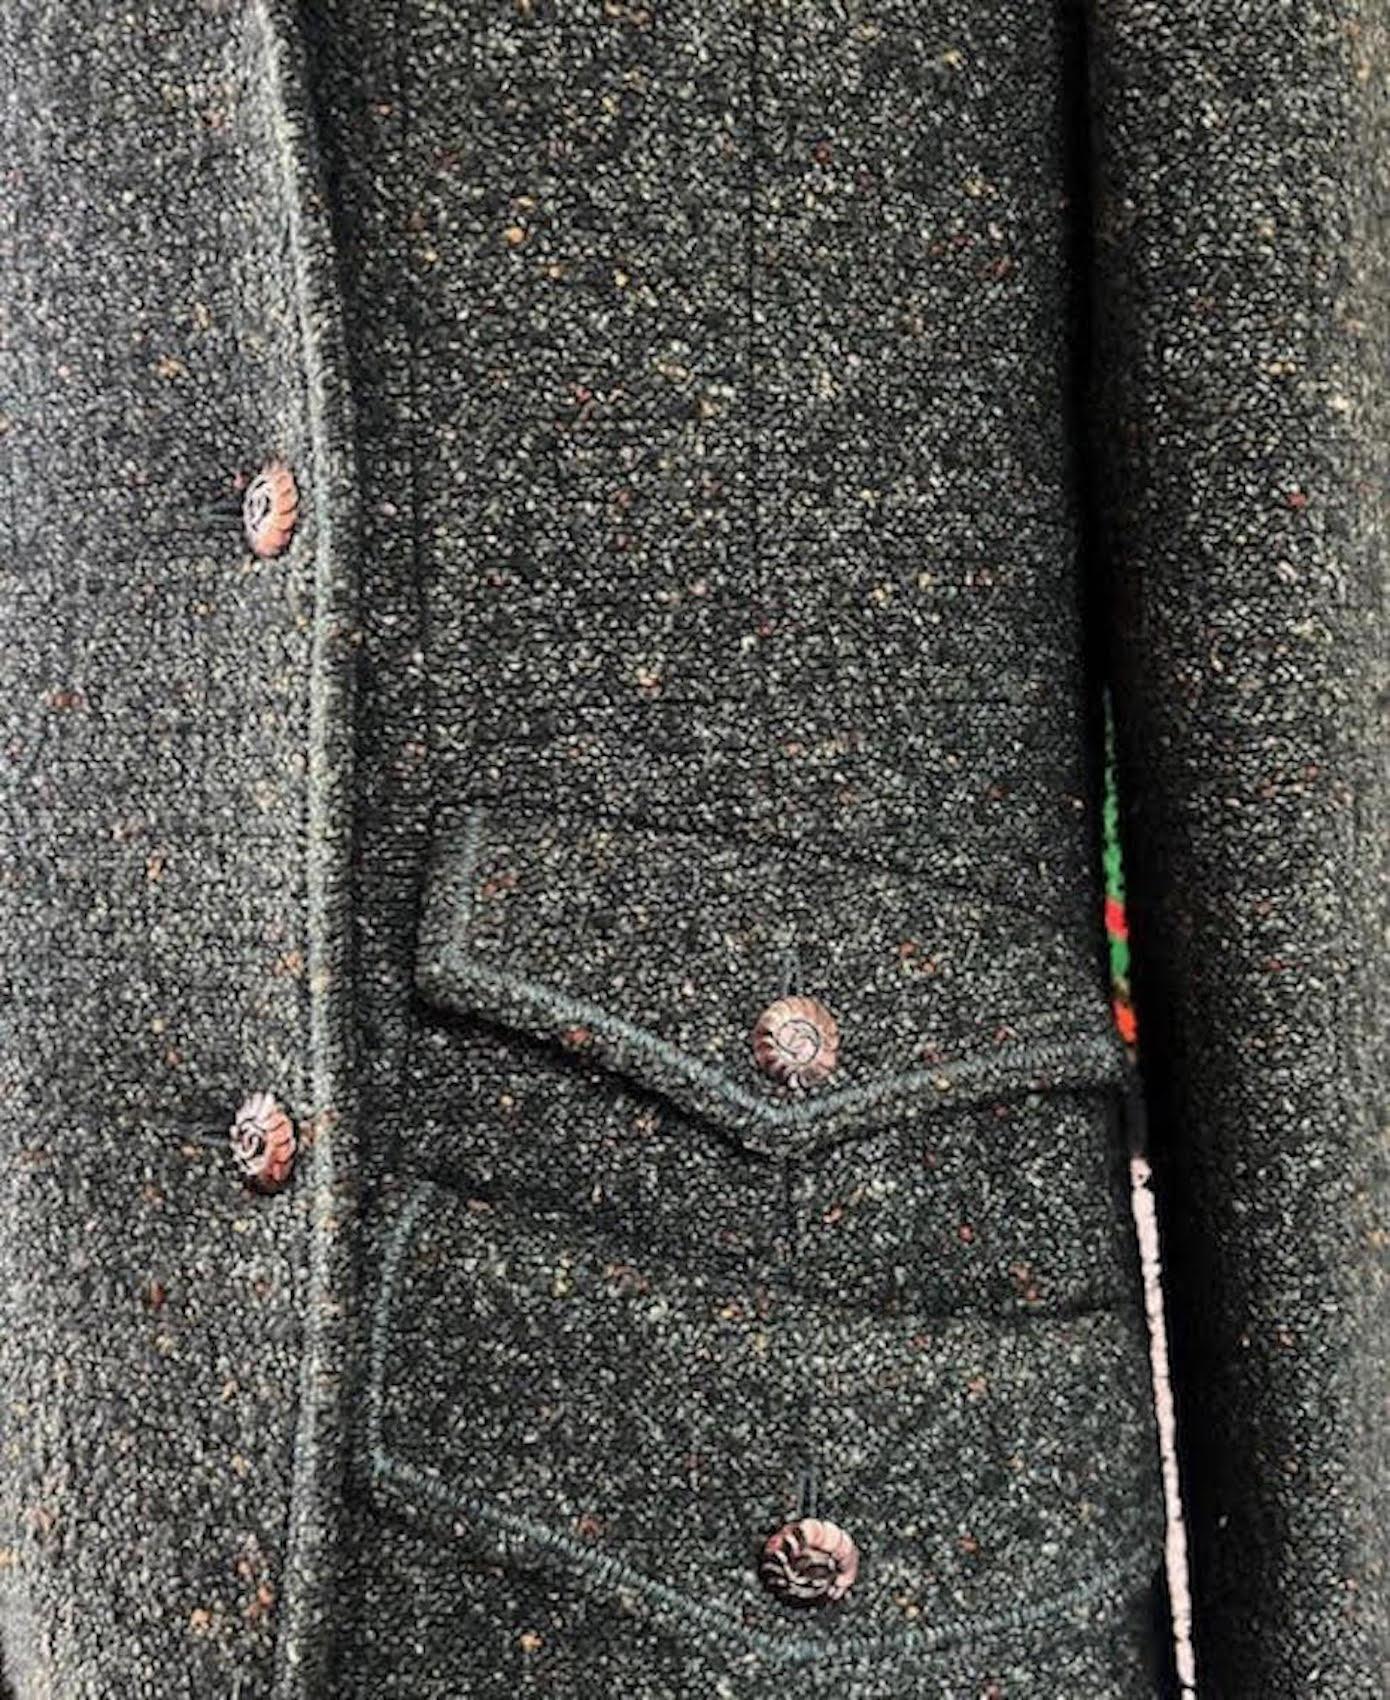 CHANEL 1997 Green Tweed Bouclé Jacket Pre-Owned Double Breasted 
A classic rare vintage Chanel green, wool bouclé jacket from Autumn 1997 collection detailed with CC-logo embossed dark silver metal CC buttons and finished with a CC logo silk lining.